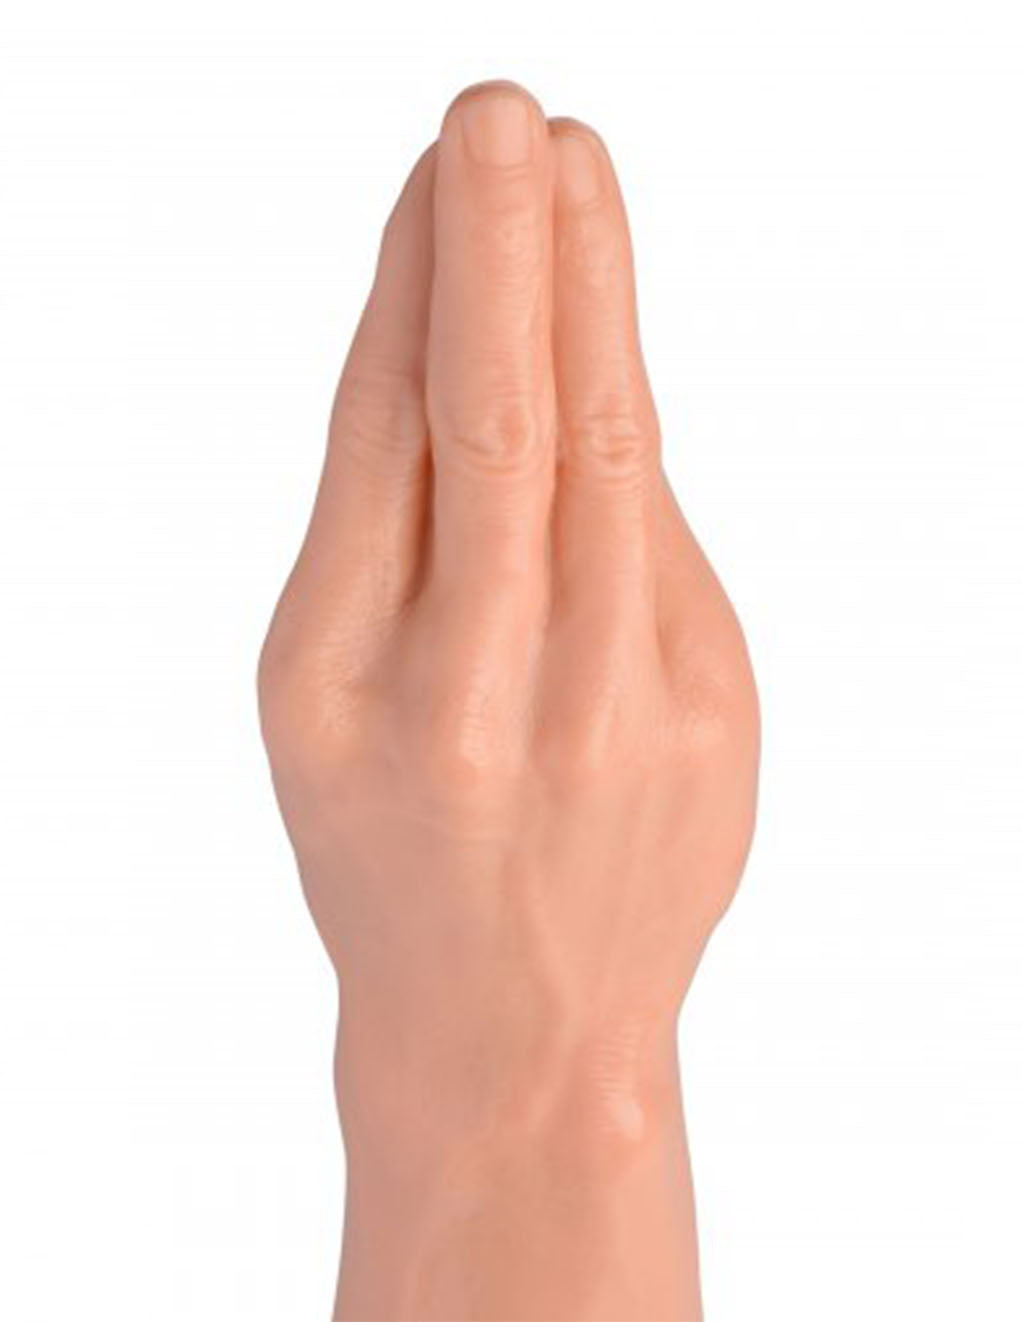 Master Series The Fister Hand and Forearm Dildo- Fingers- Close Up